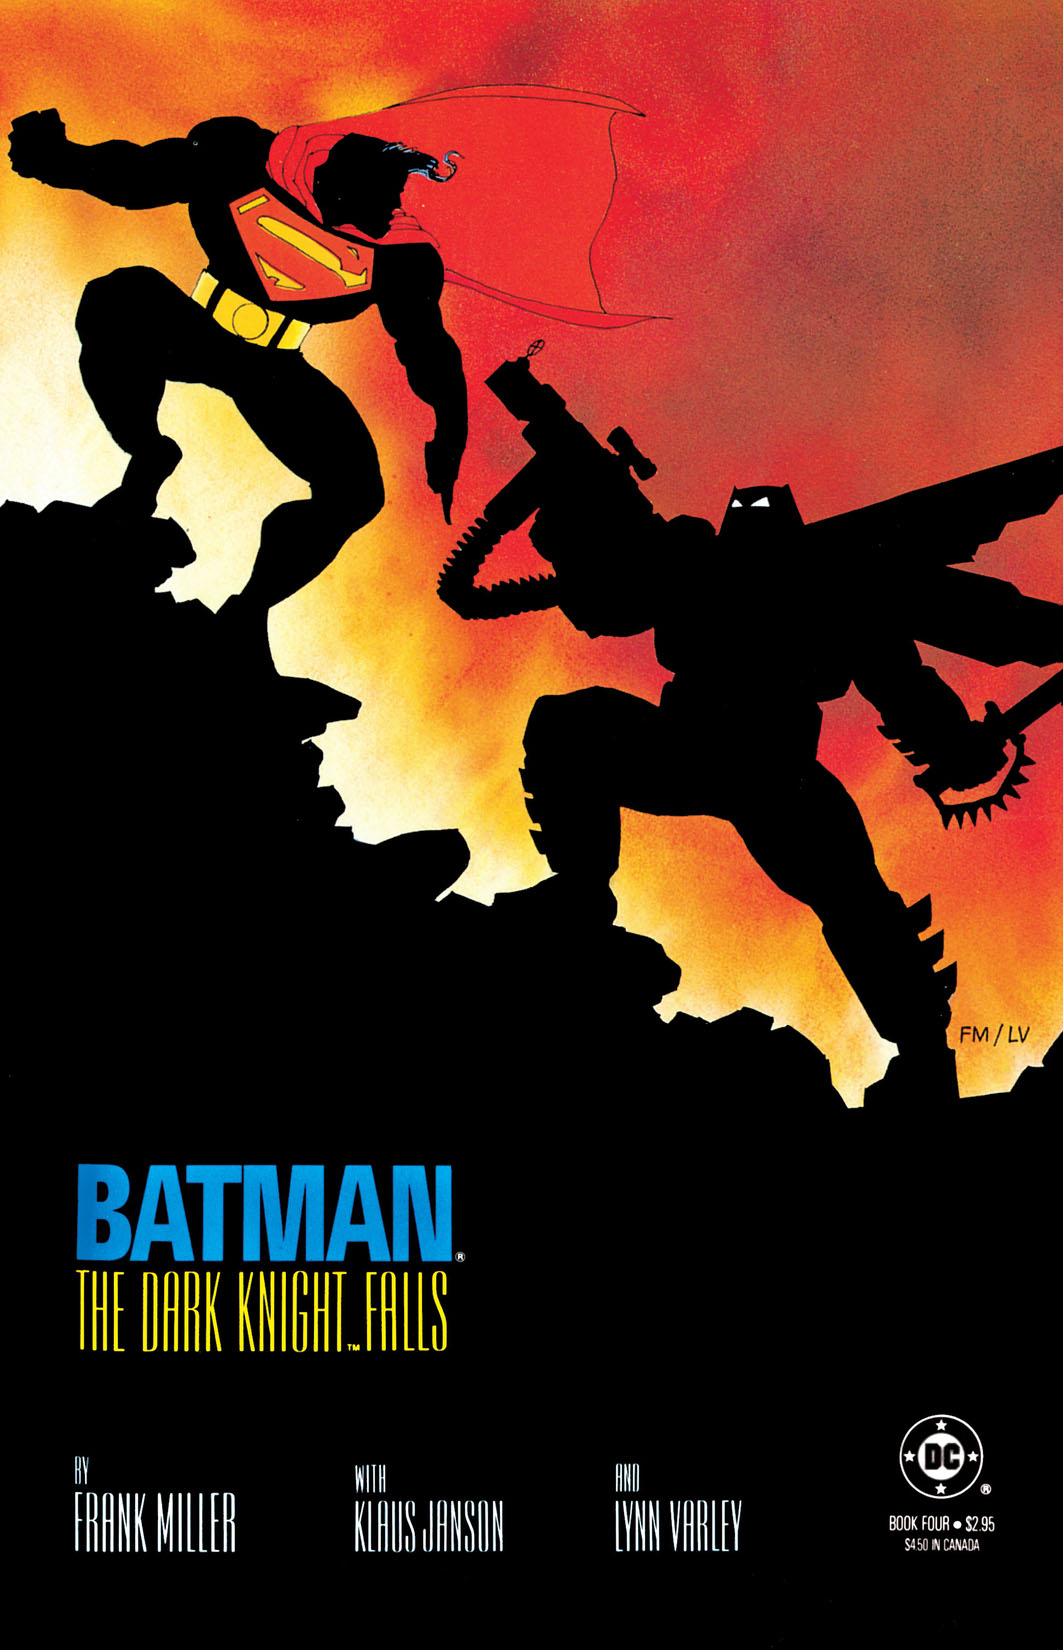 Batman: The Dark Knight Returns #4 preview images